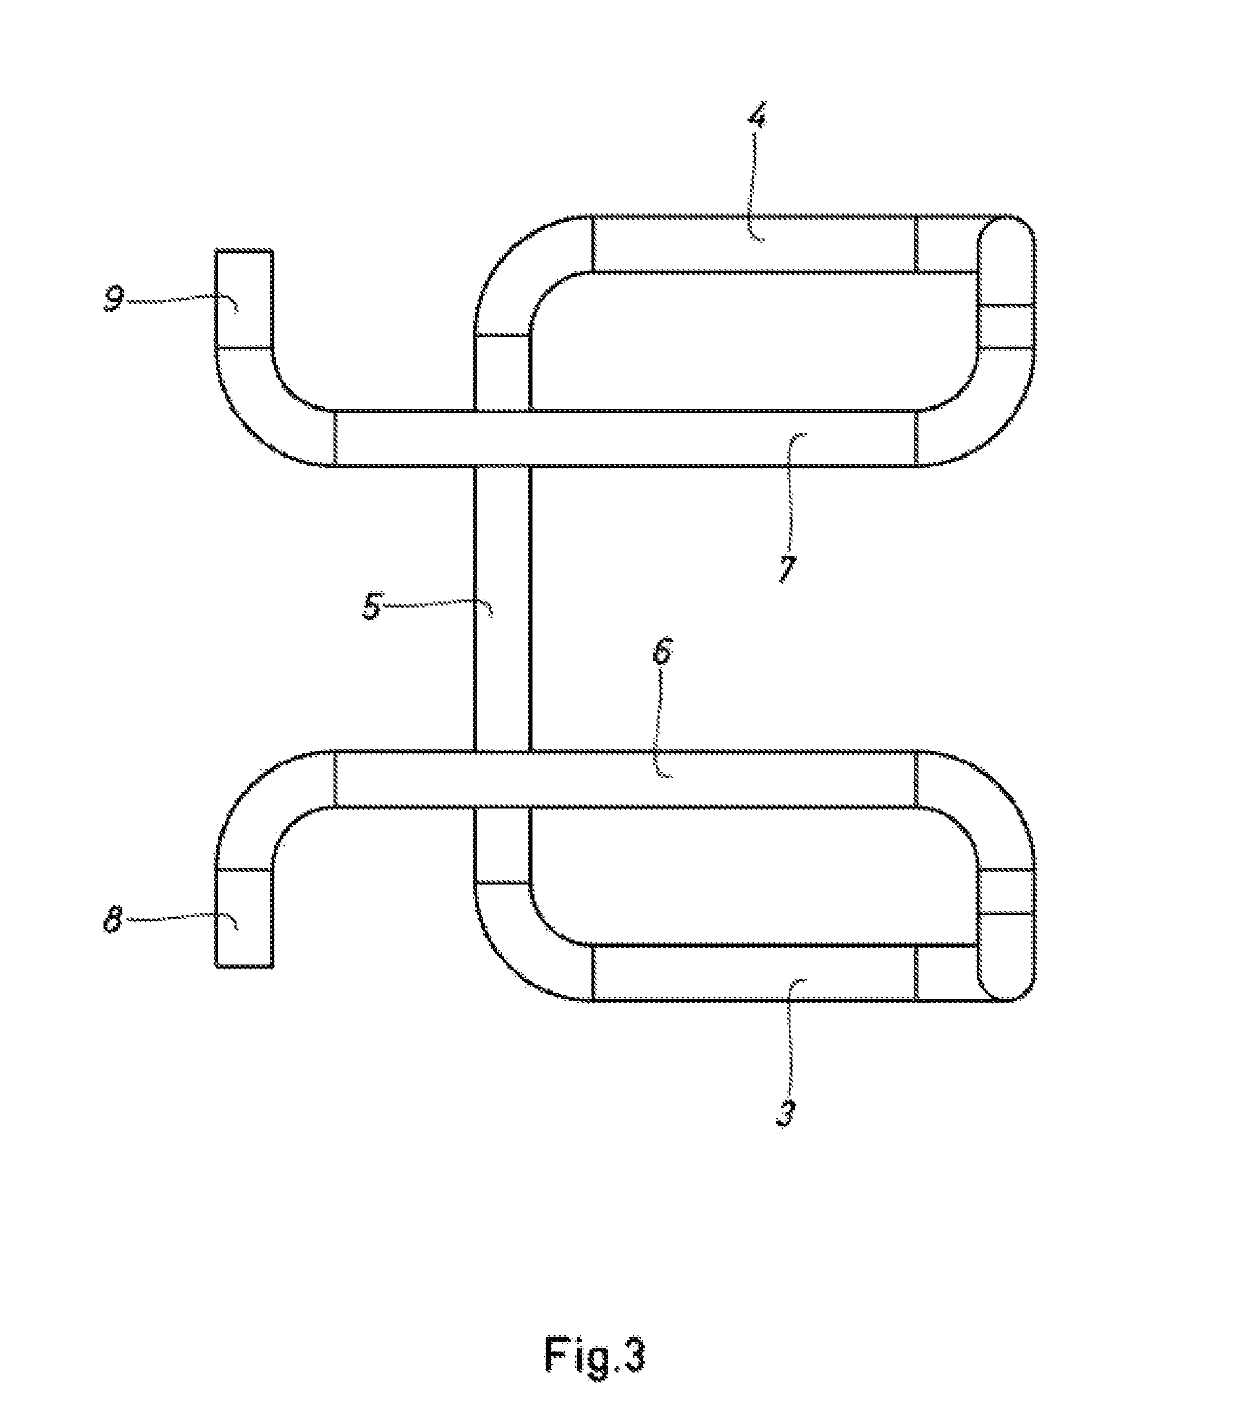 Device for dismountably connecting two intersecting formwork beams